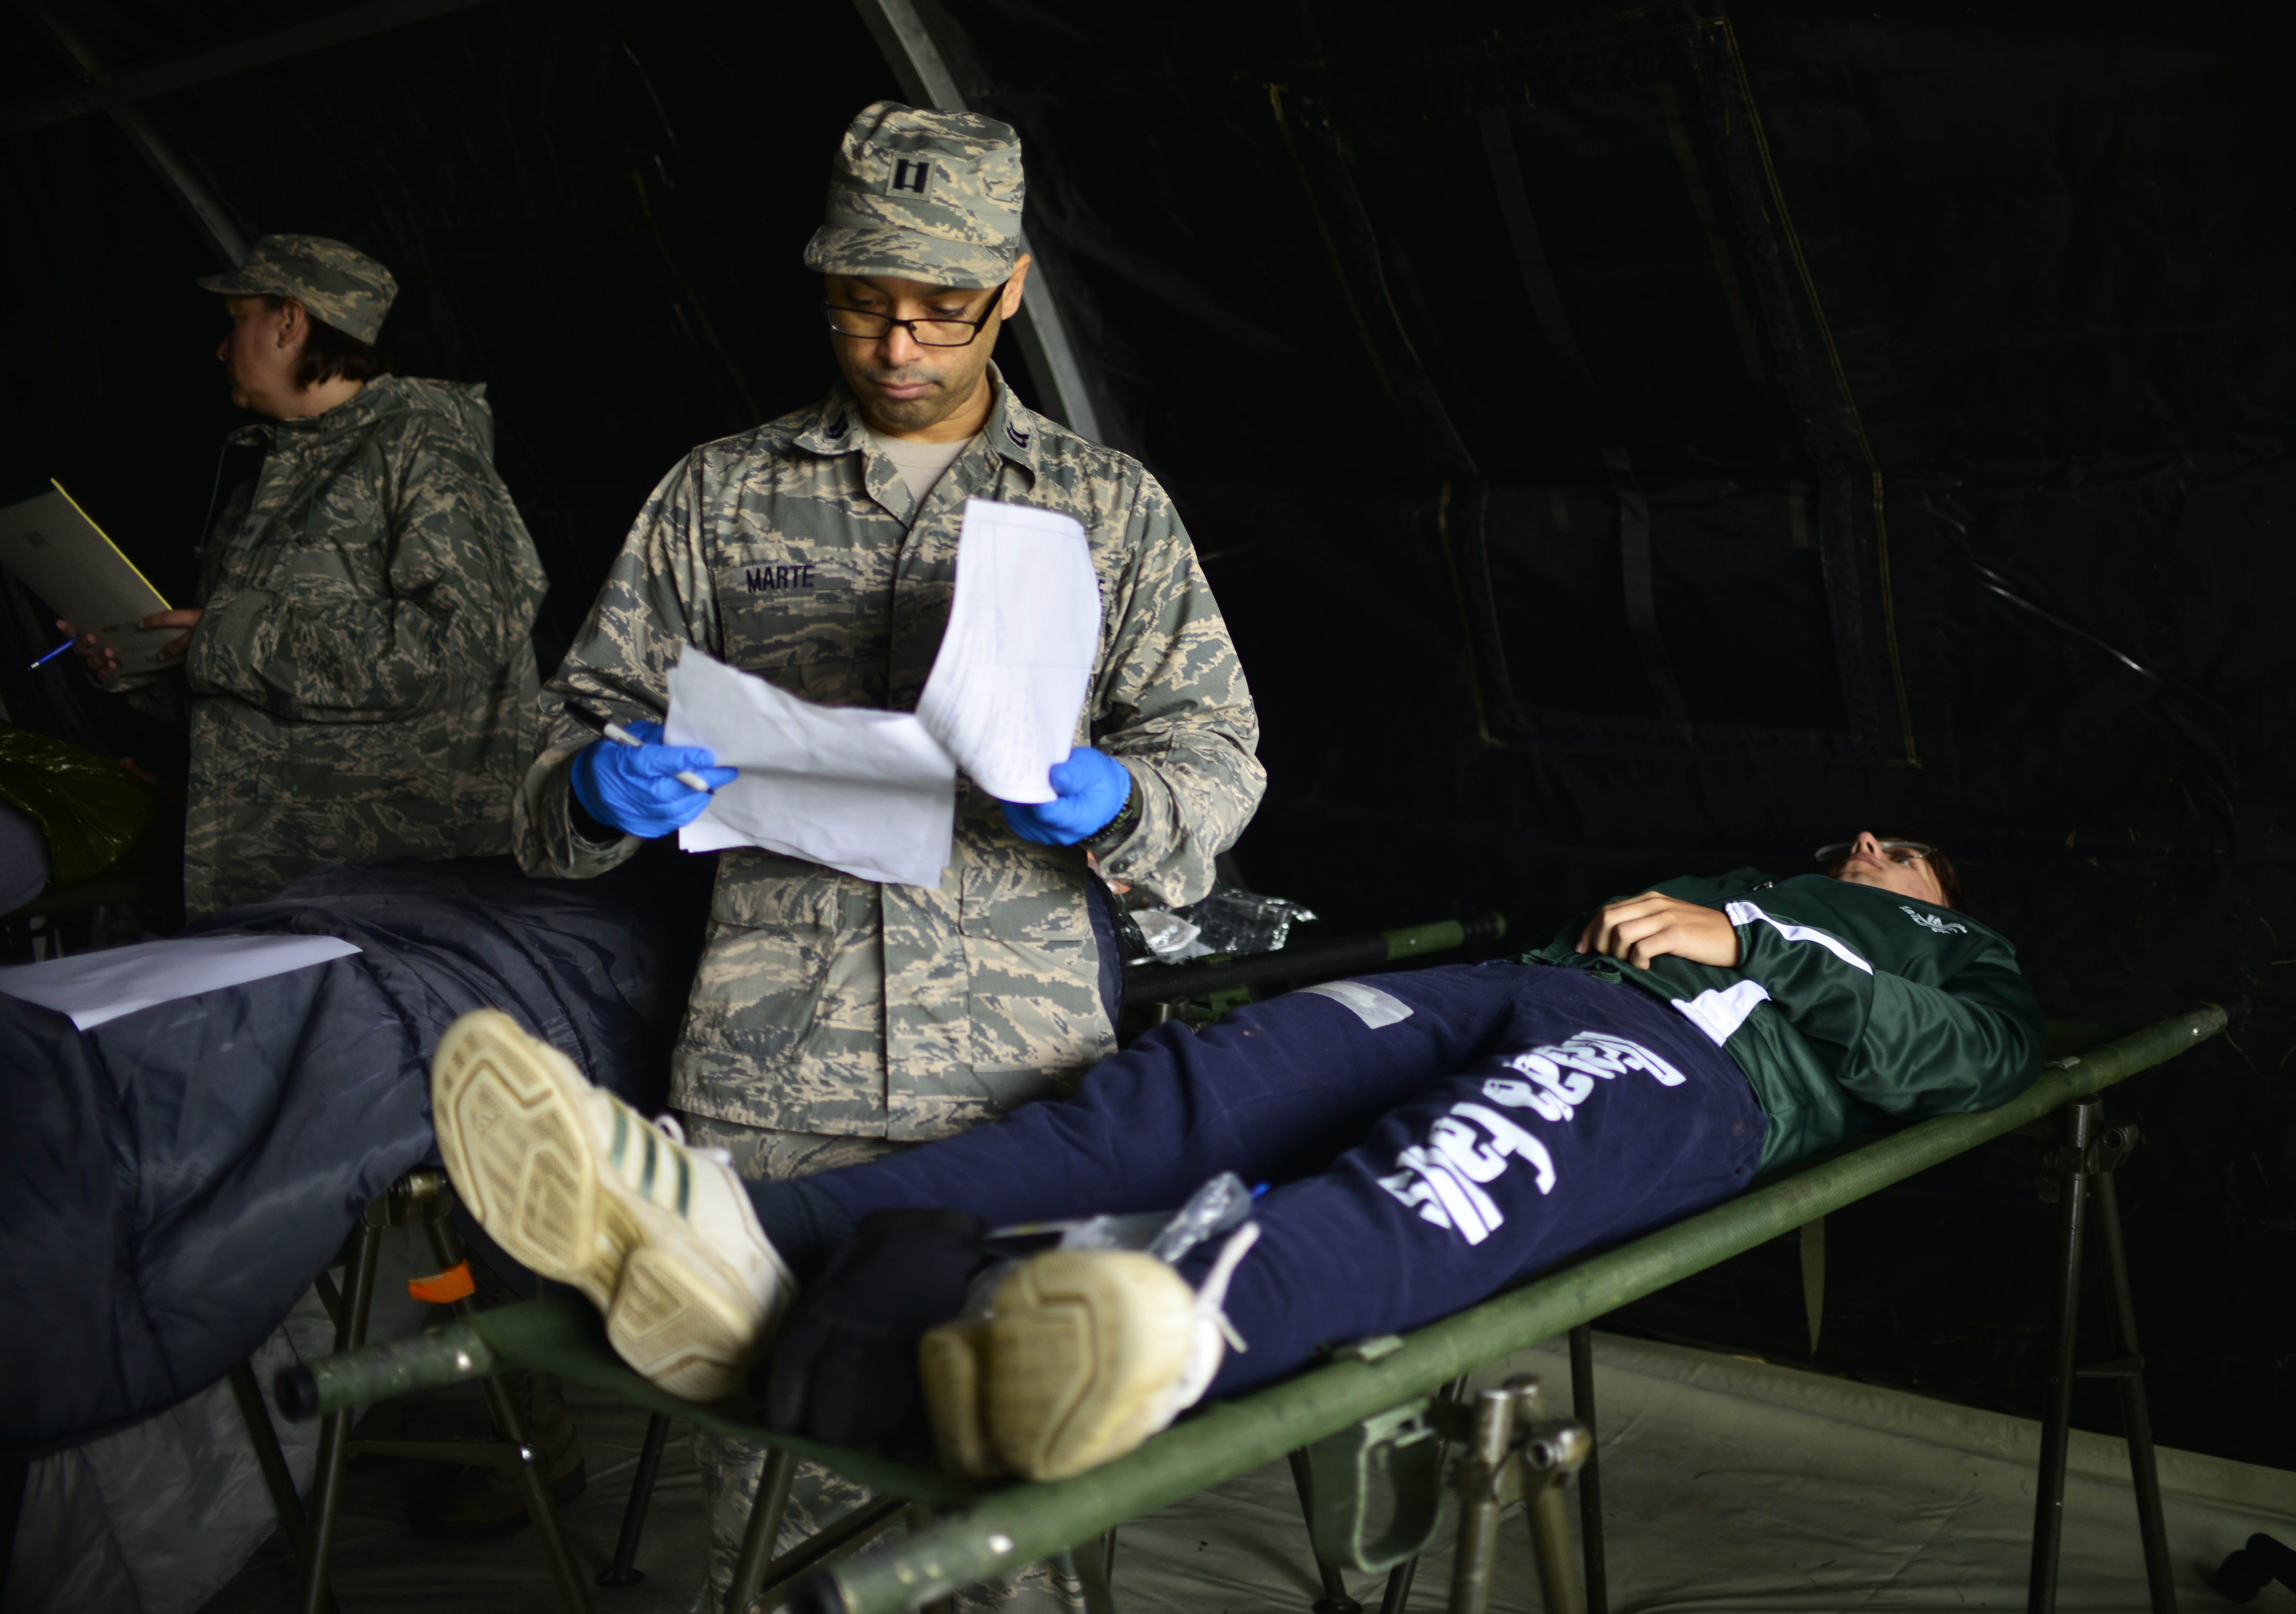 914 ASTS participates in mass casualty exercise